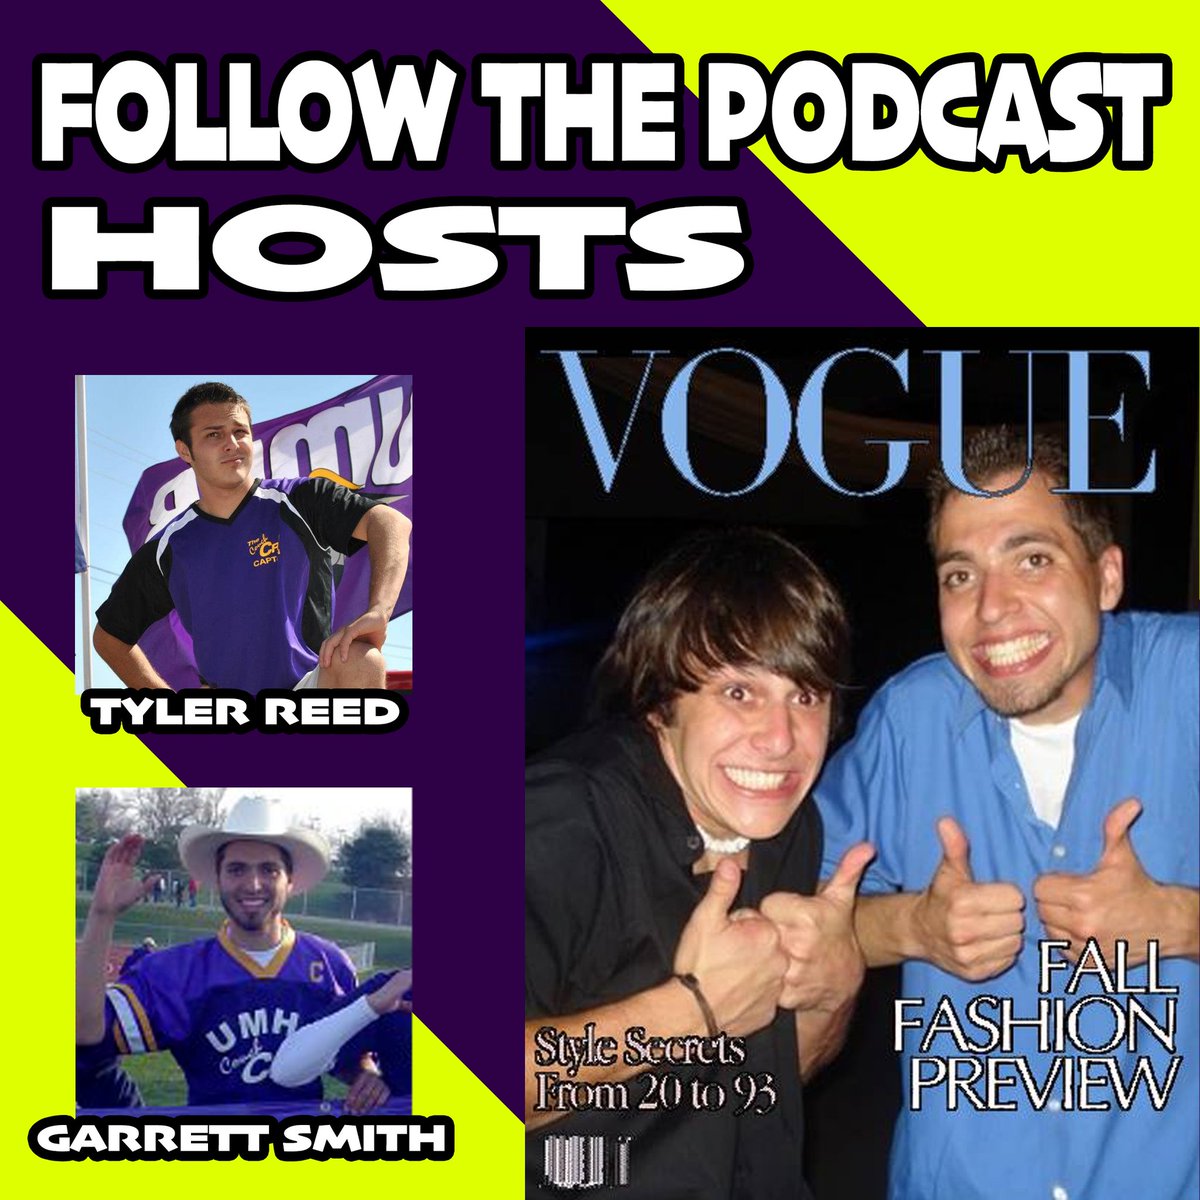 Hey CRU!! Be sure to follow our hosts, @FriarTuckDeluxe and @GarrettSmithTX!

#umhb #d3 #gocru #beltontx